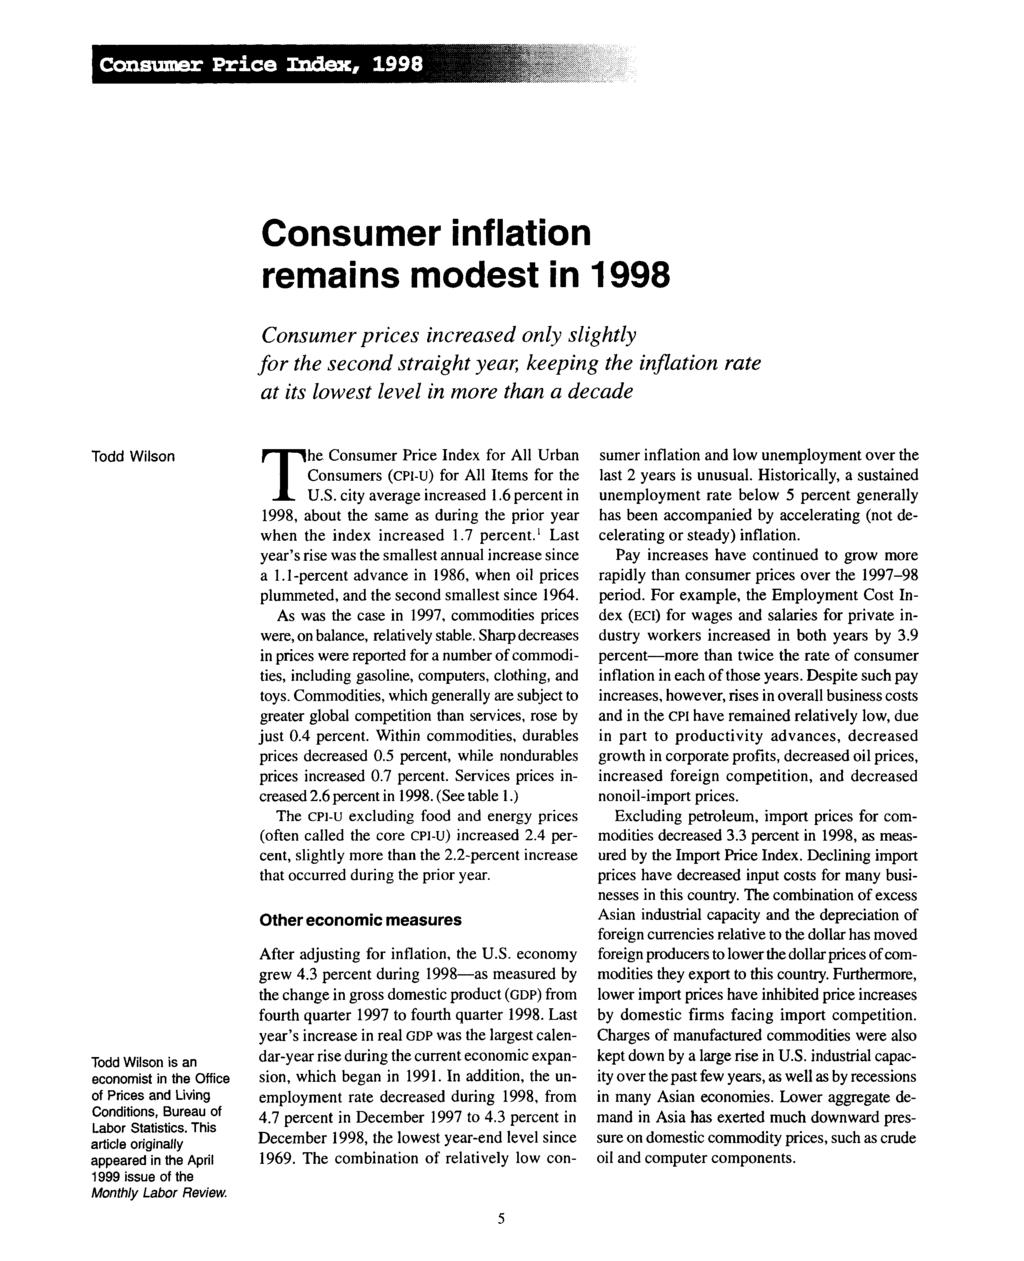 Consumer Price, Consumer inflation remains modest in Consumer prices increased only slightly fo r the second straight year, keeping the inflation rate at its lowest level in more than a decade Todd